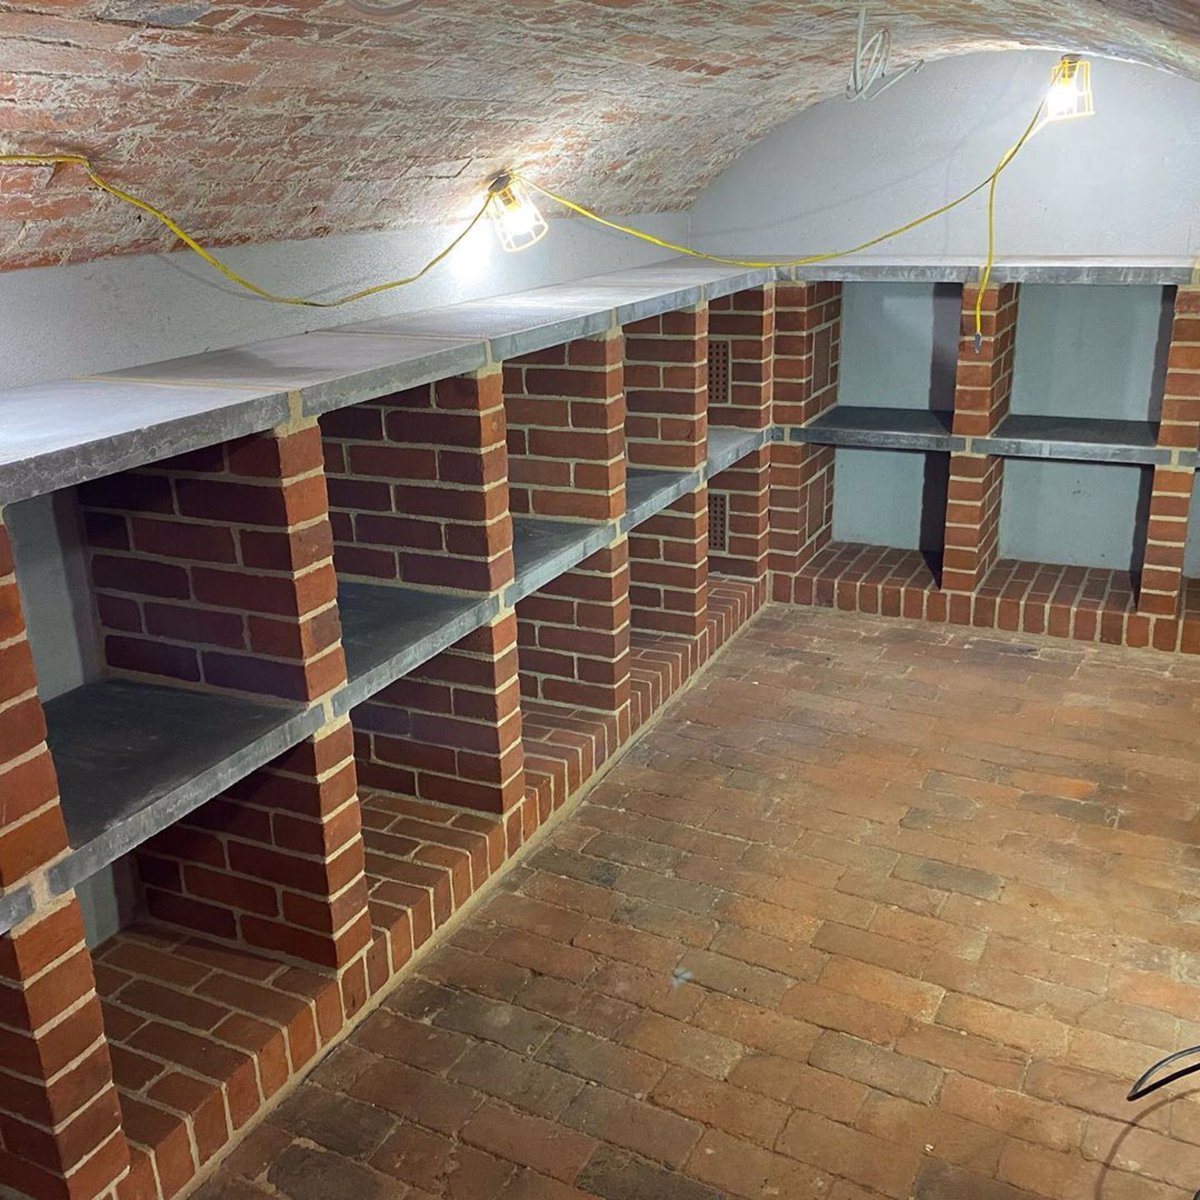 Completed wine bins and cellar! 🍷 

#projectcomplete #winebins #wine #winecellar #winecellardesign #qualitybuilders #countryhousebuilders #rmouldingandco 

mouldingthebuilder.co.uk